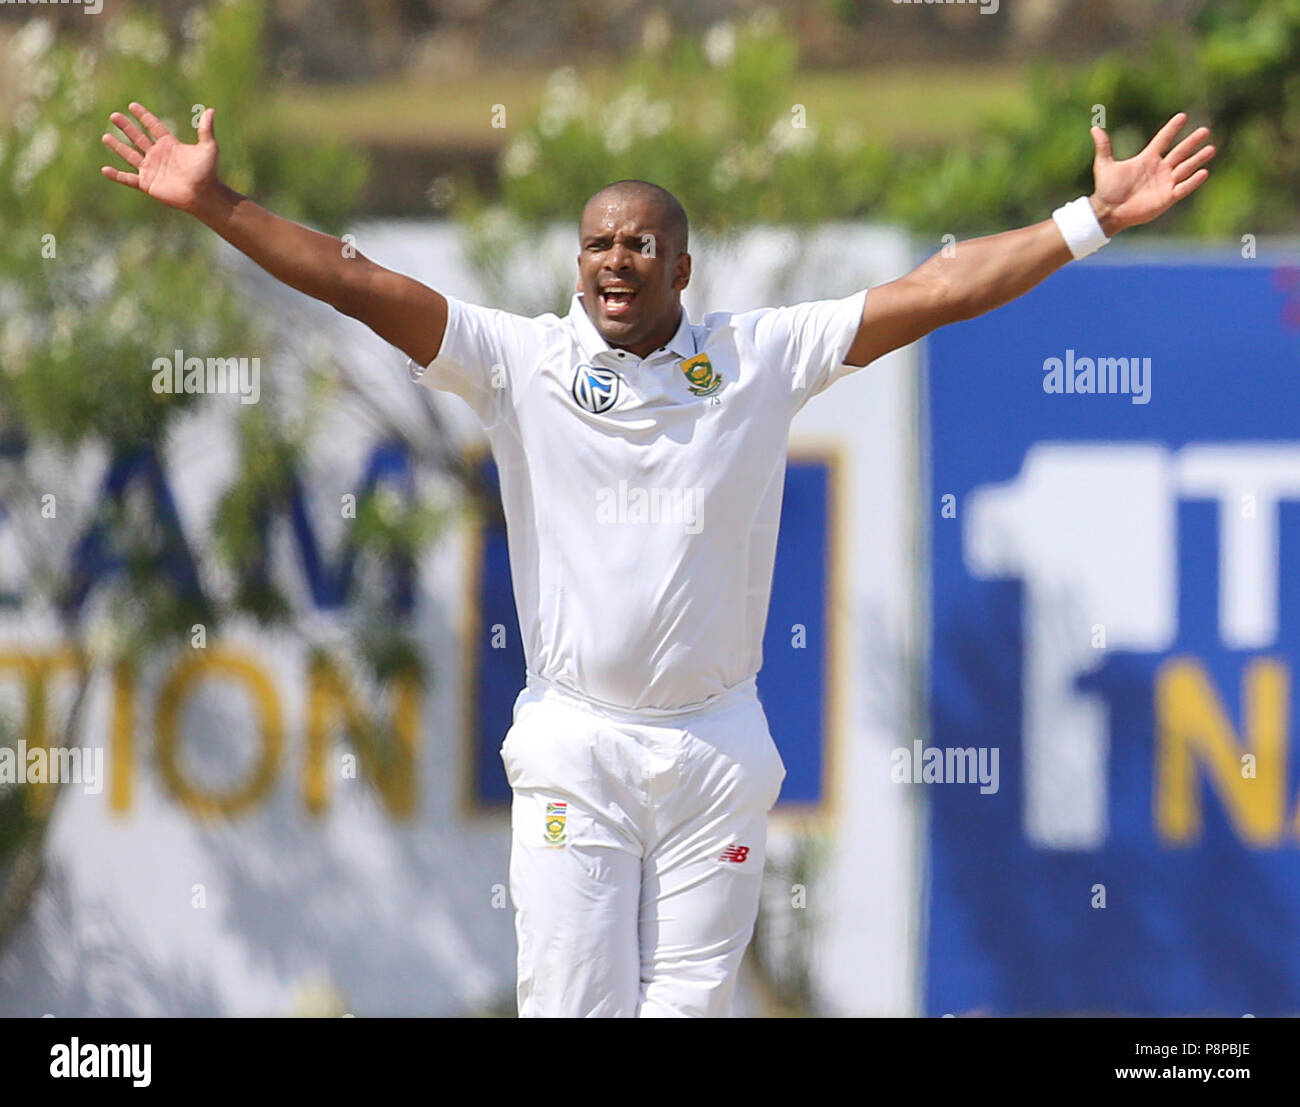 South African cricketer Vernon Philander appeals for a Leg Before Wicket ( LBW) decision against Sri Lankan batsman Dimuth Karunaratne during the  first day of their opening Test match between Sri Lanka and